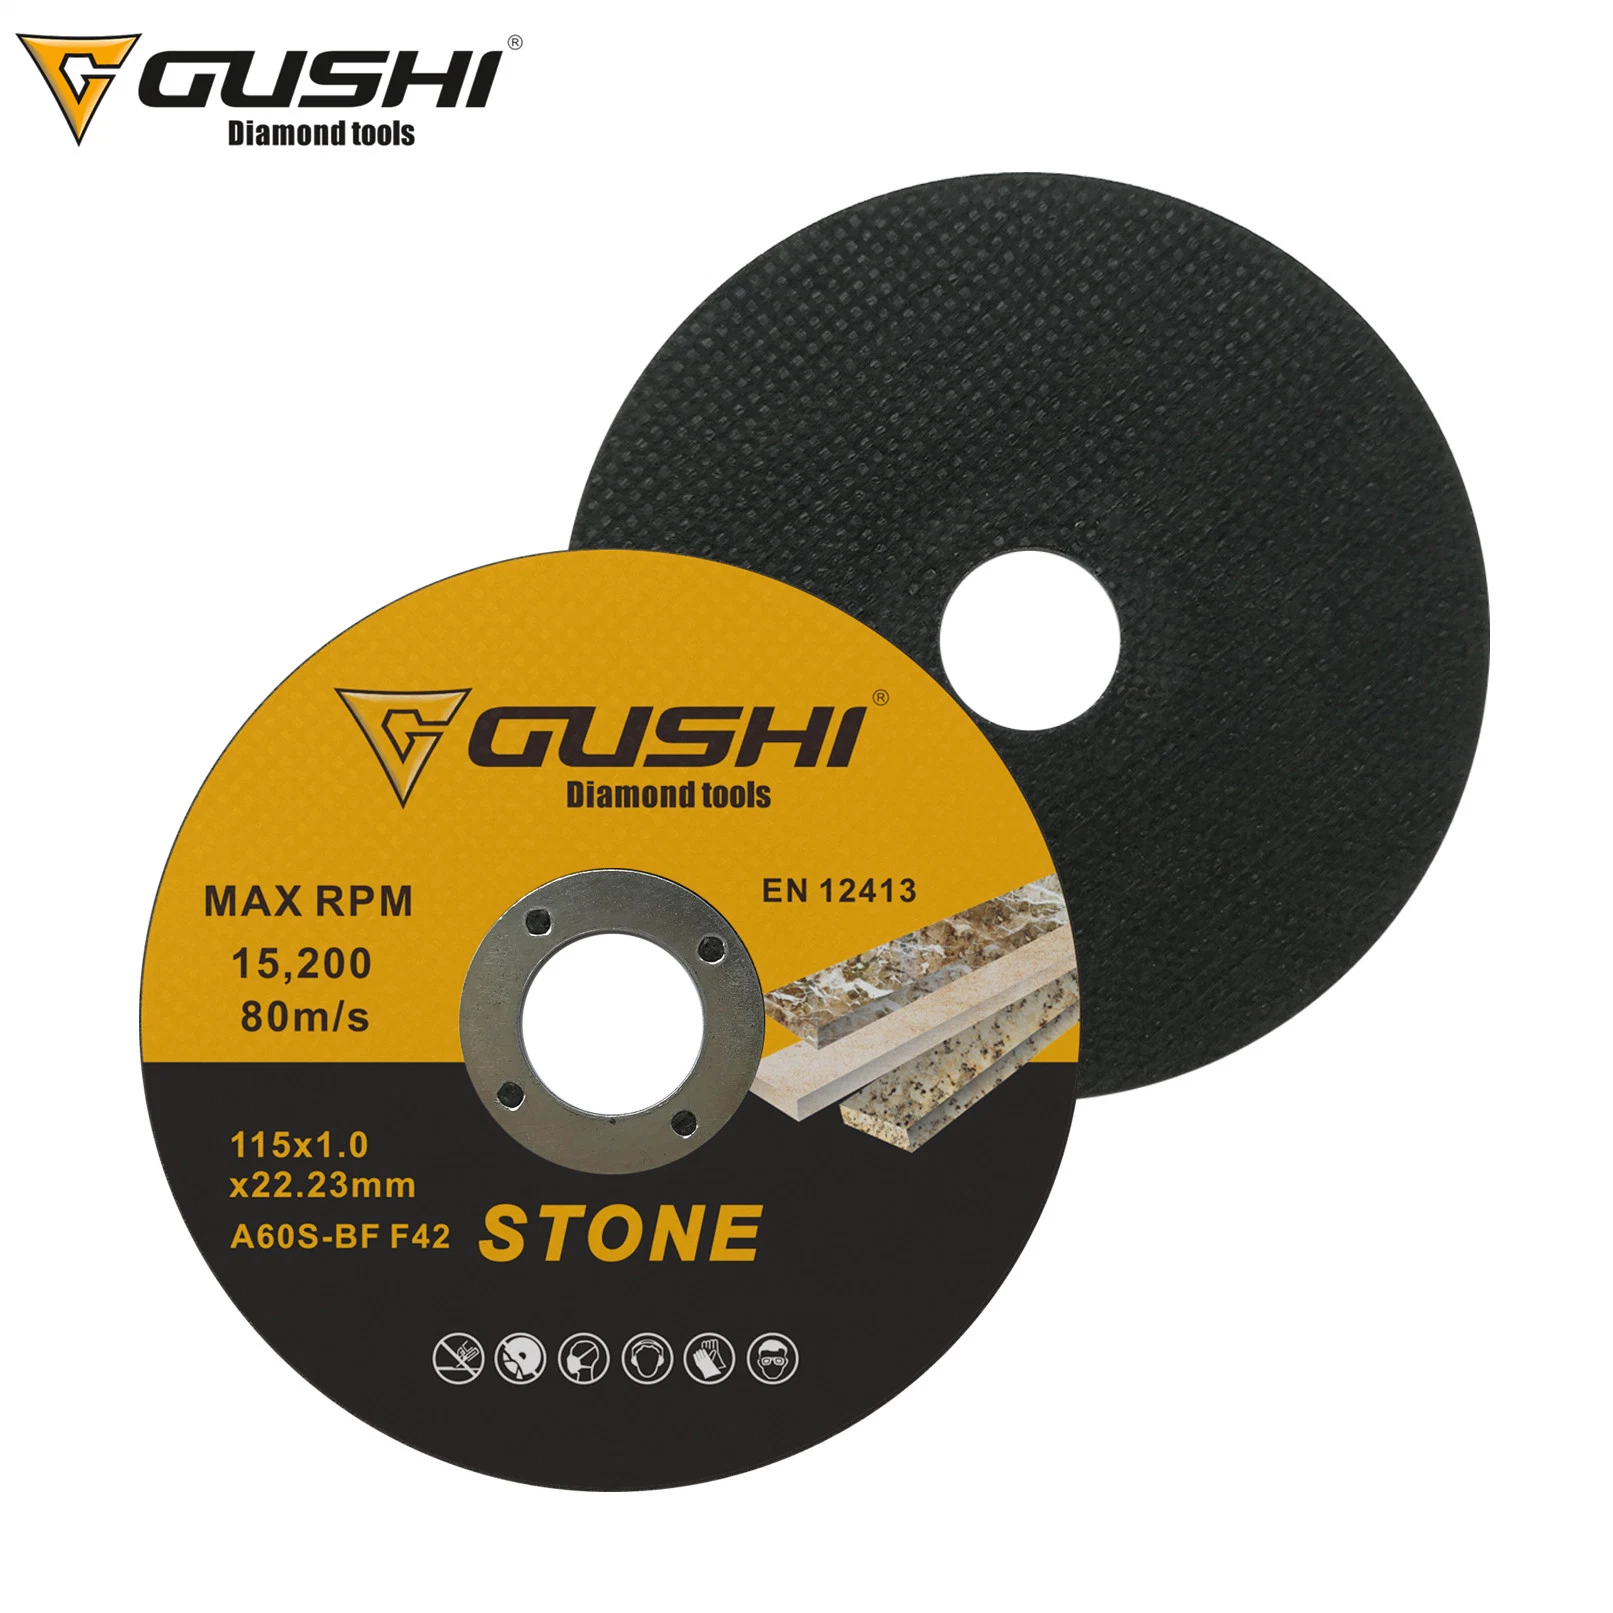 4hcr 5 Inch 125mm Angle Grinder Abrasive Iron Cutting Metal Disc Cut off Wheels Tools